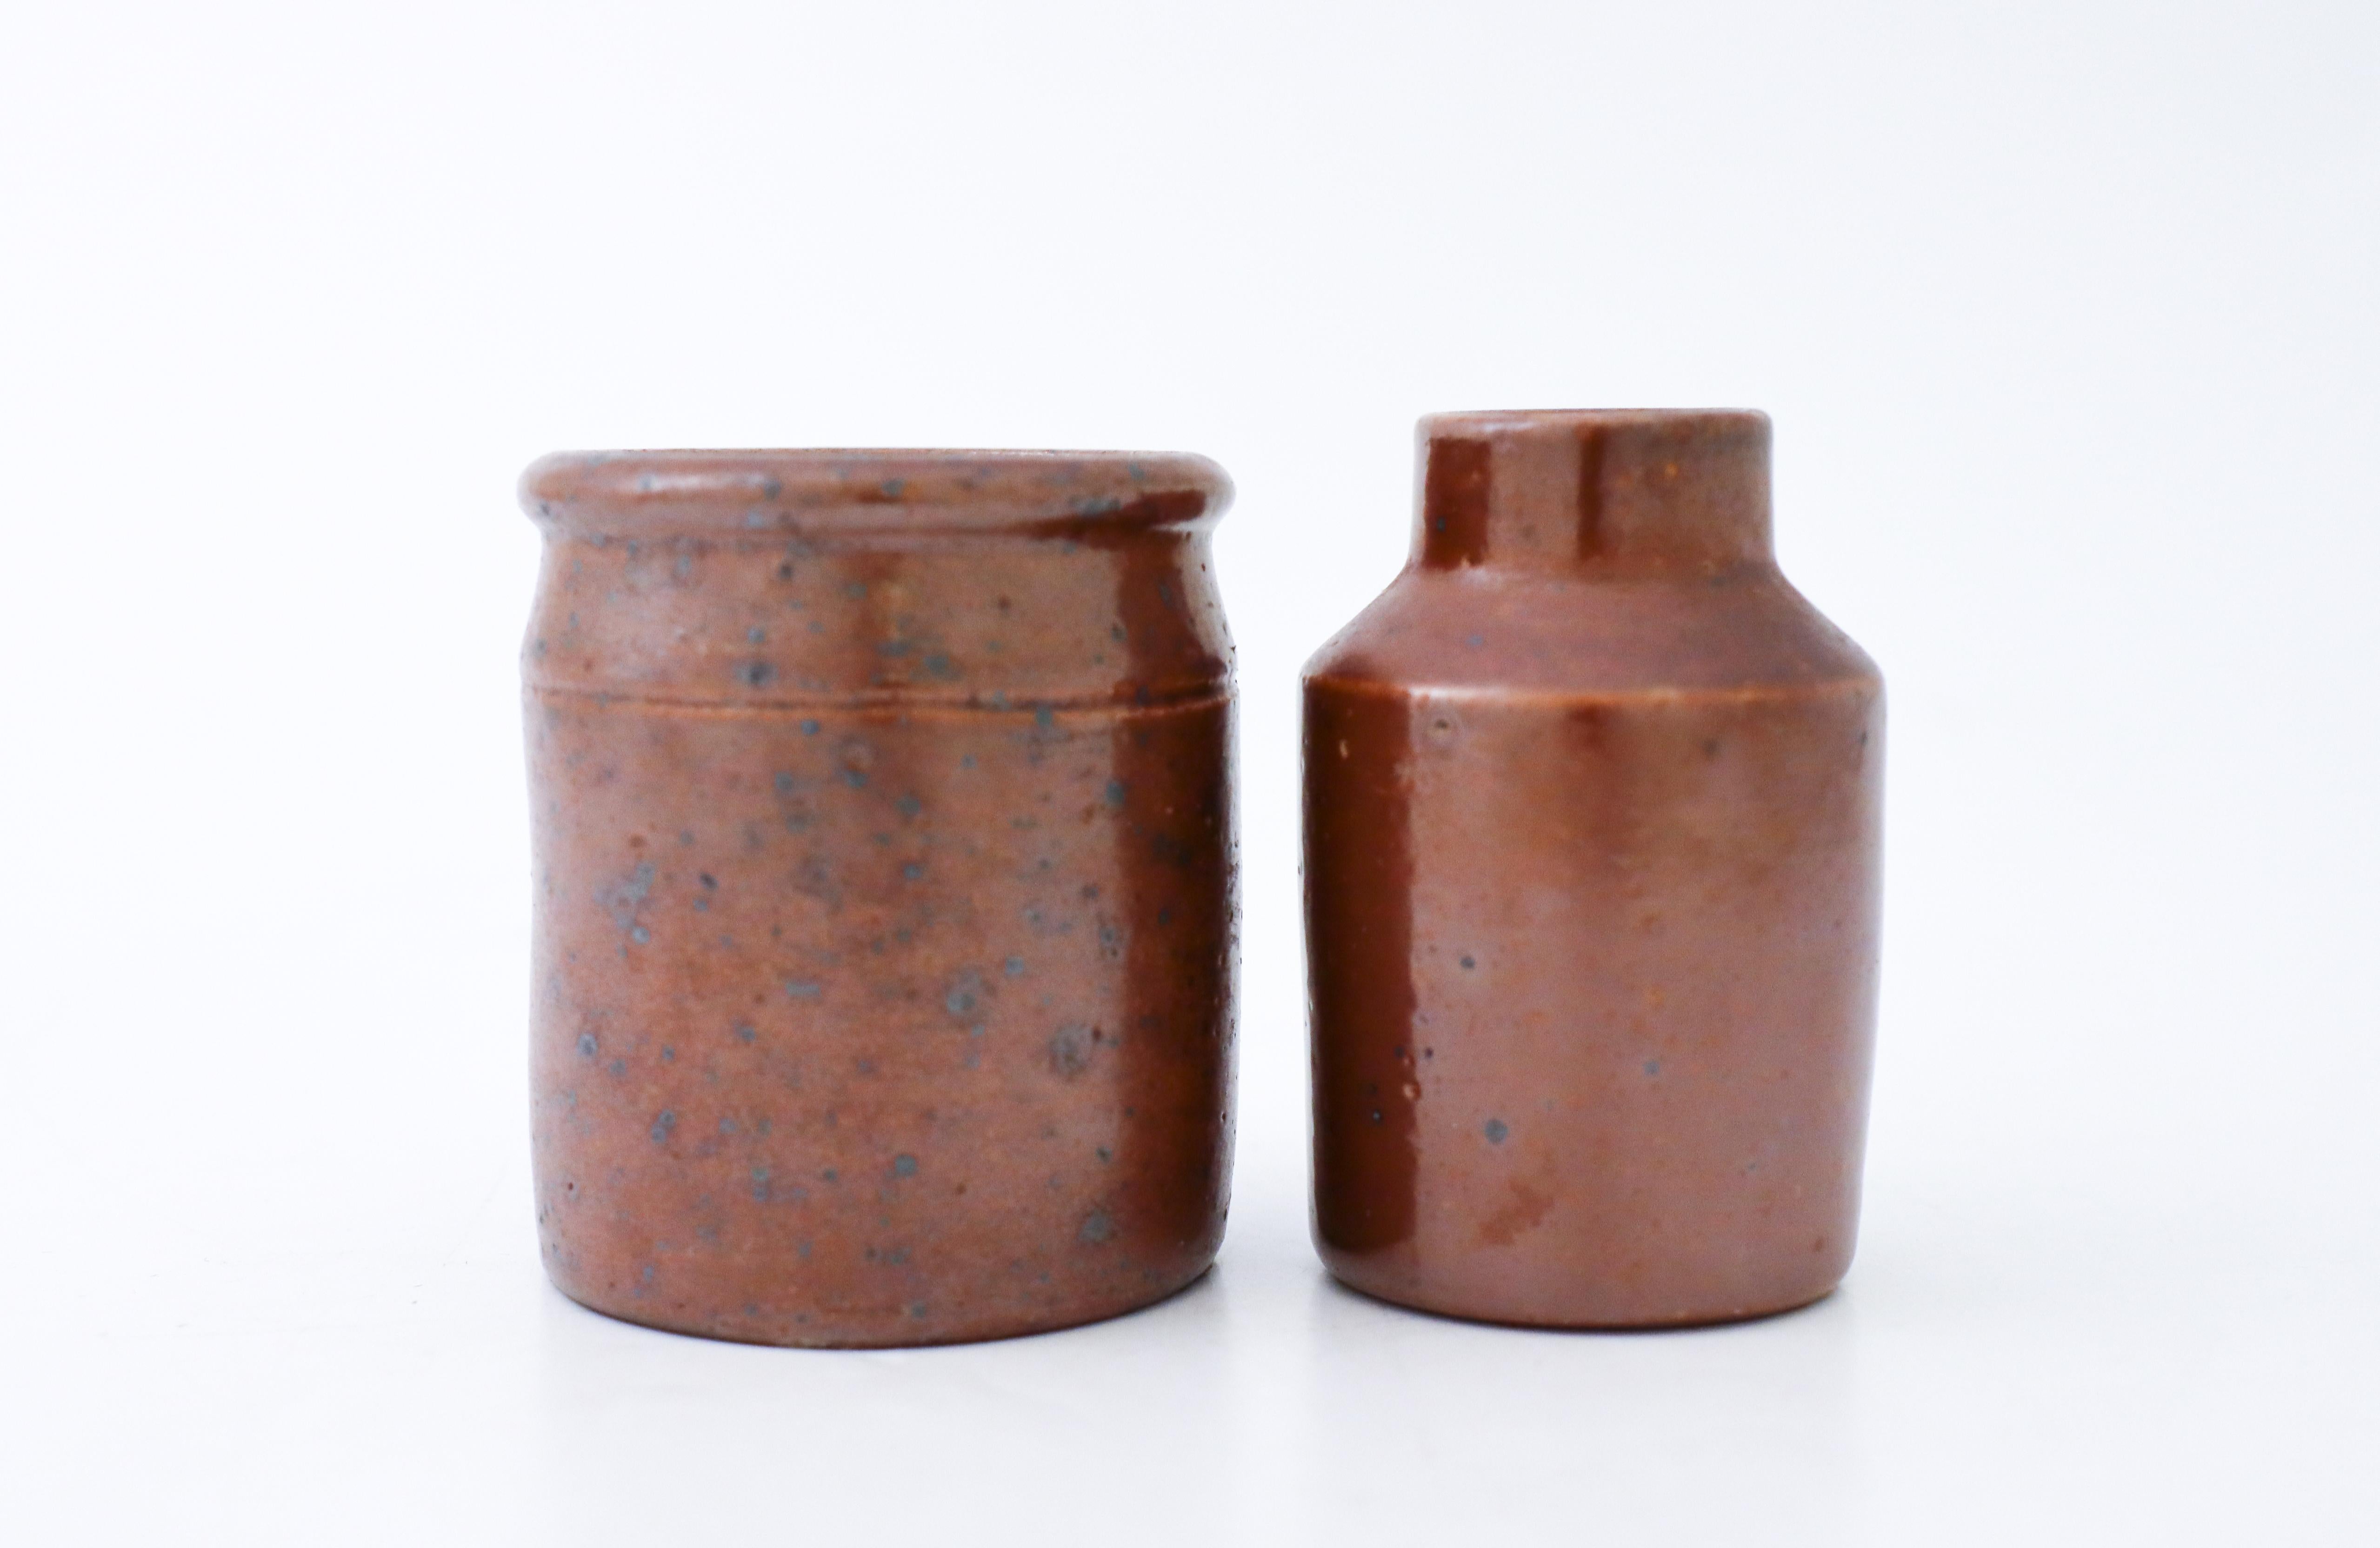 Two miniature stone jars produced at Raus in Helsingborg in Sweden. They are about 6.5 cm high and in excellent condition.